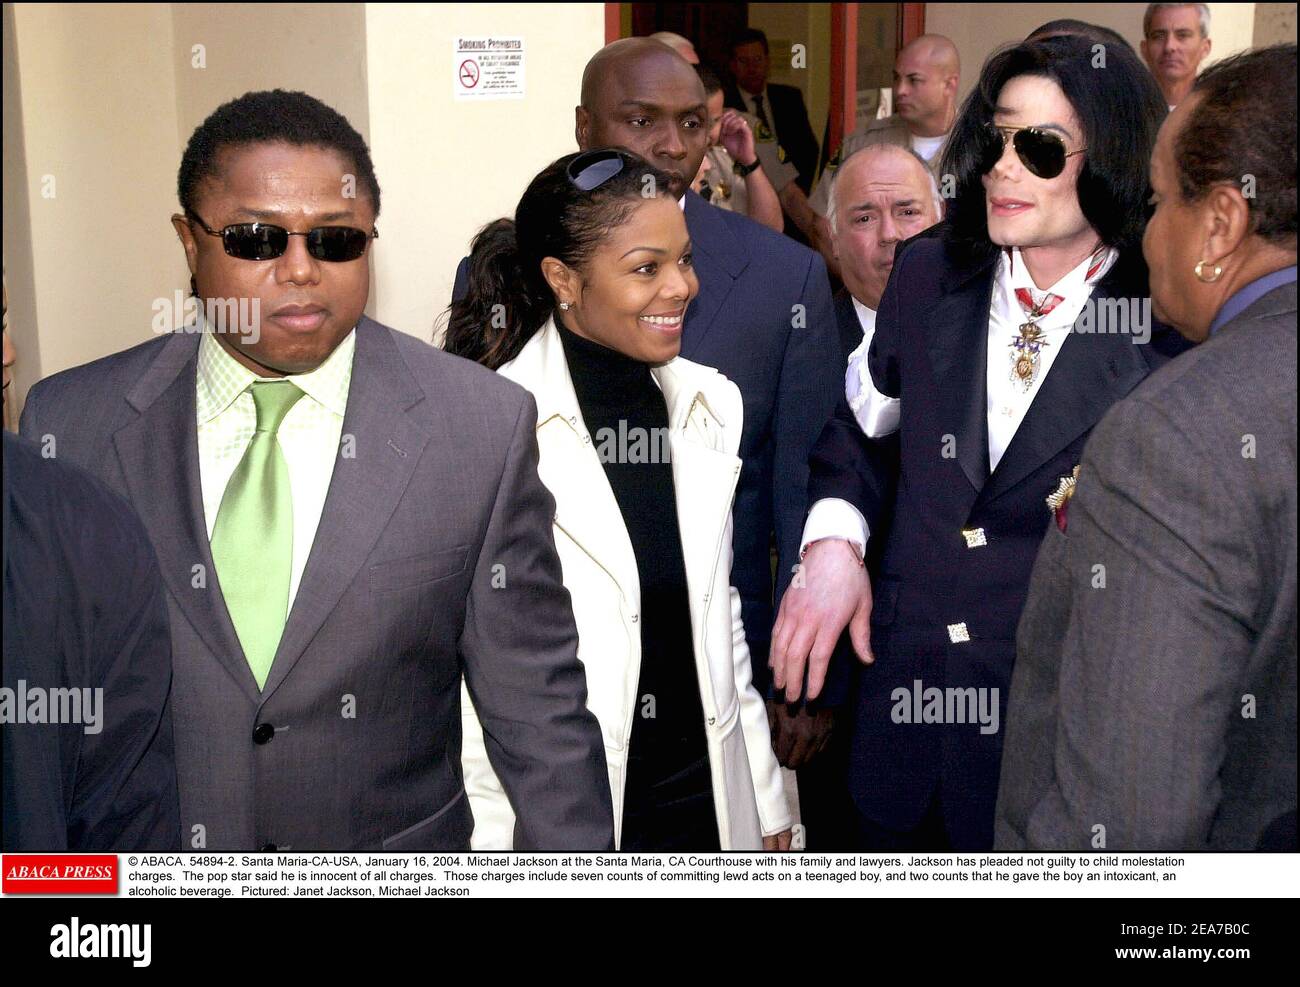 © ABACA. 54894-2. Santa Maria-CA-USA, January 16, 2004. Michael Jackson at the Santa Maria, CA Courthouse with his family and lawyers. Jackson has pleaded not guilty to child molestation charges. The pop star said he is innocent of all charges. Those charges include seven counts of committing lewd acts on a teenaged boy, and two counts that he gave the boy an intoxicant, an alcoholic beverage. Pictured: Janet Jackson, Michael Jackson Stock Photo